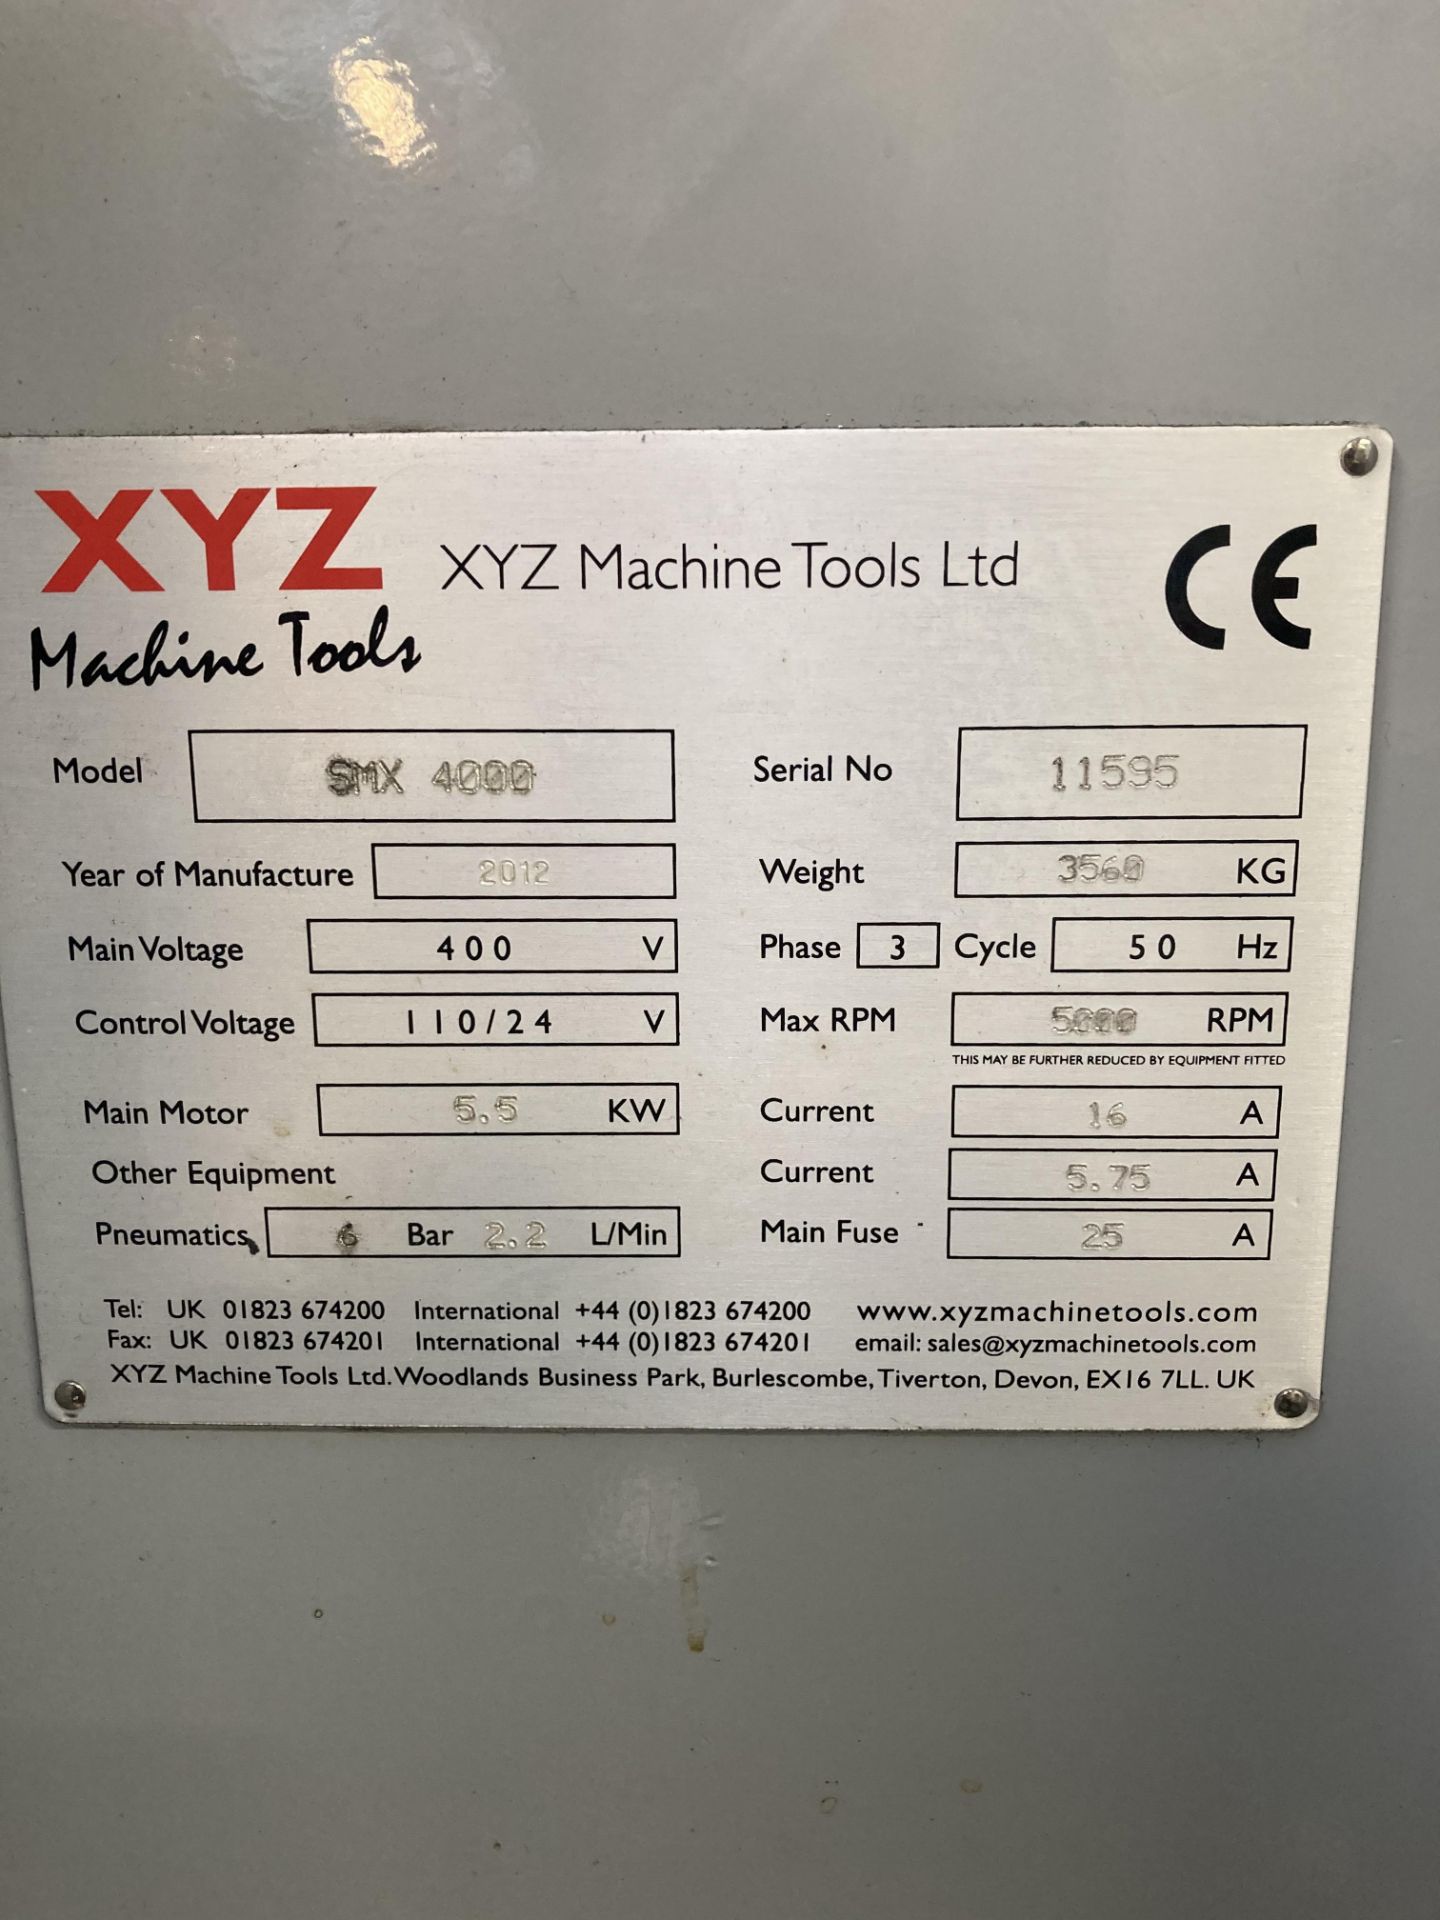 XYZ SMX 4000 CNC 3 axis vertical bed milling machine, Serial No. 11595 (2012), table size 1474mm x - Image 6 of 7